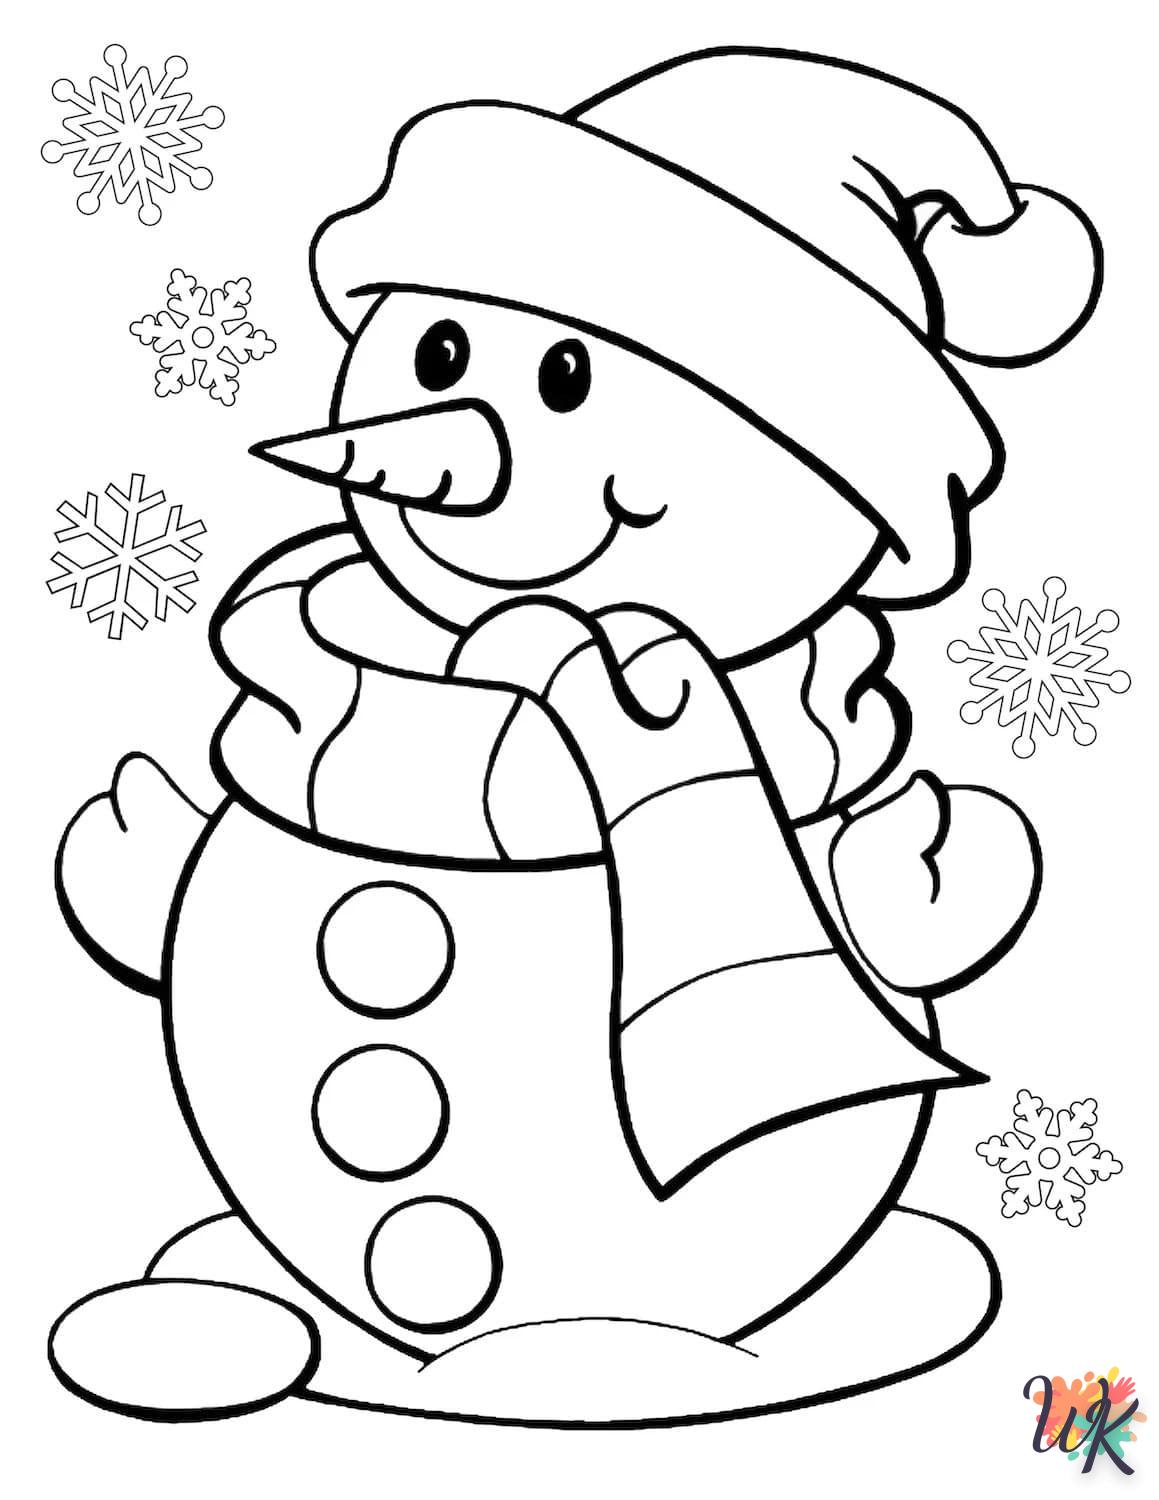 Snowman coloring page to print for children aged 6 years 2